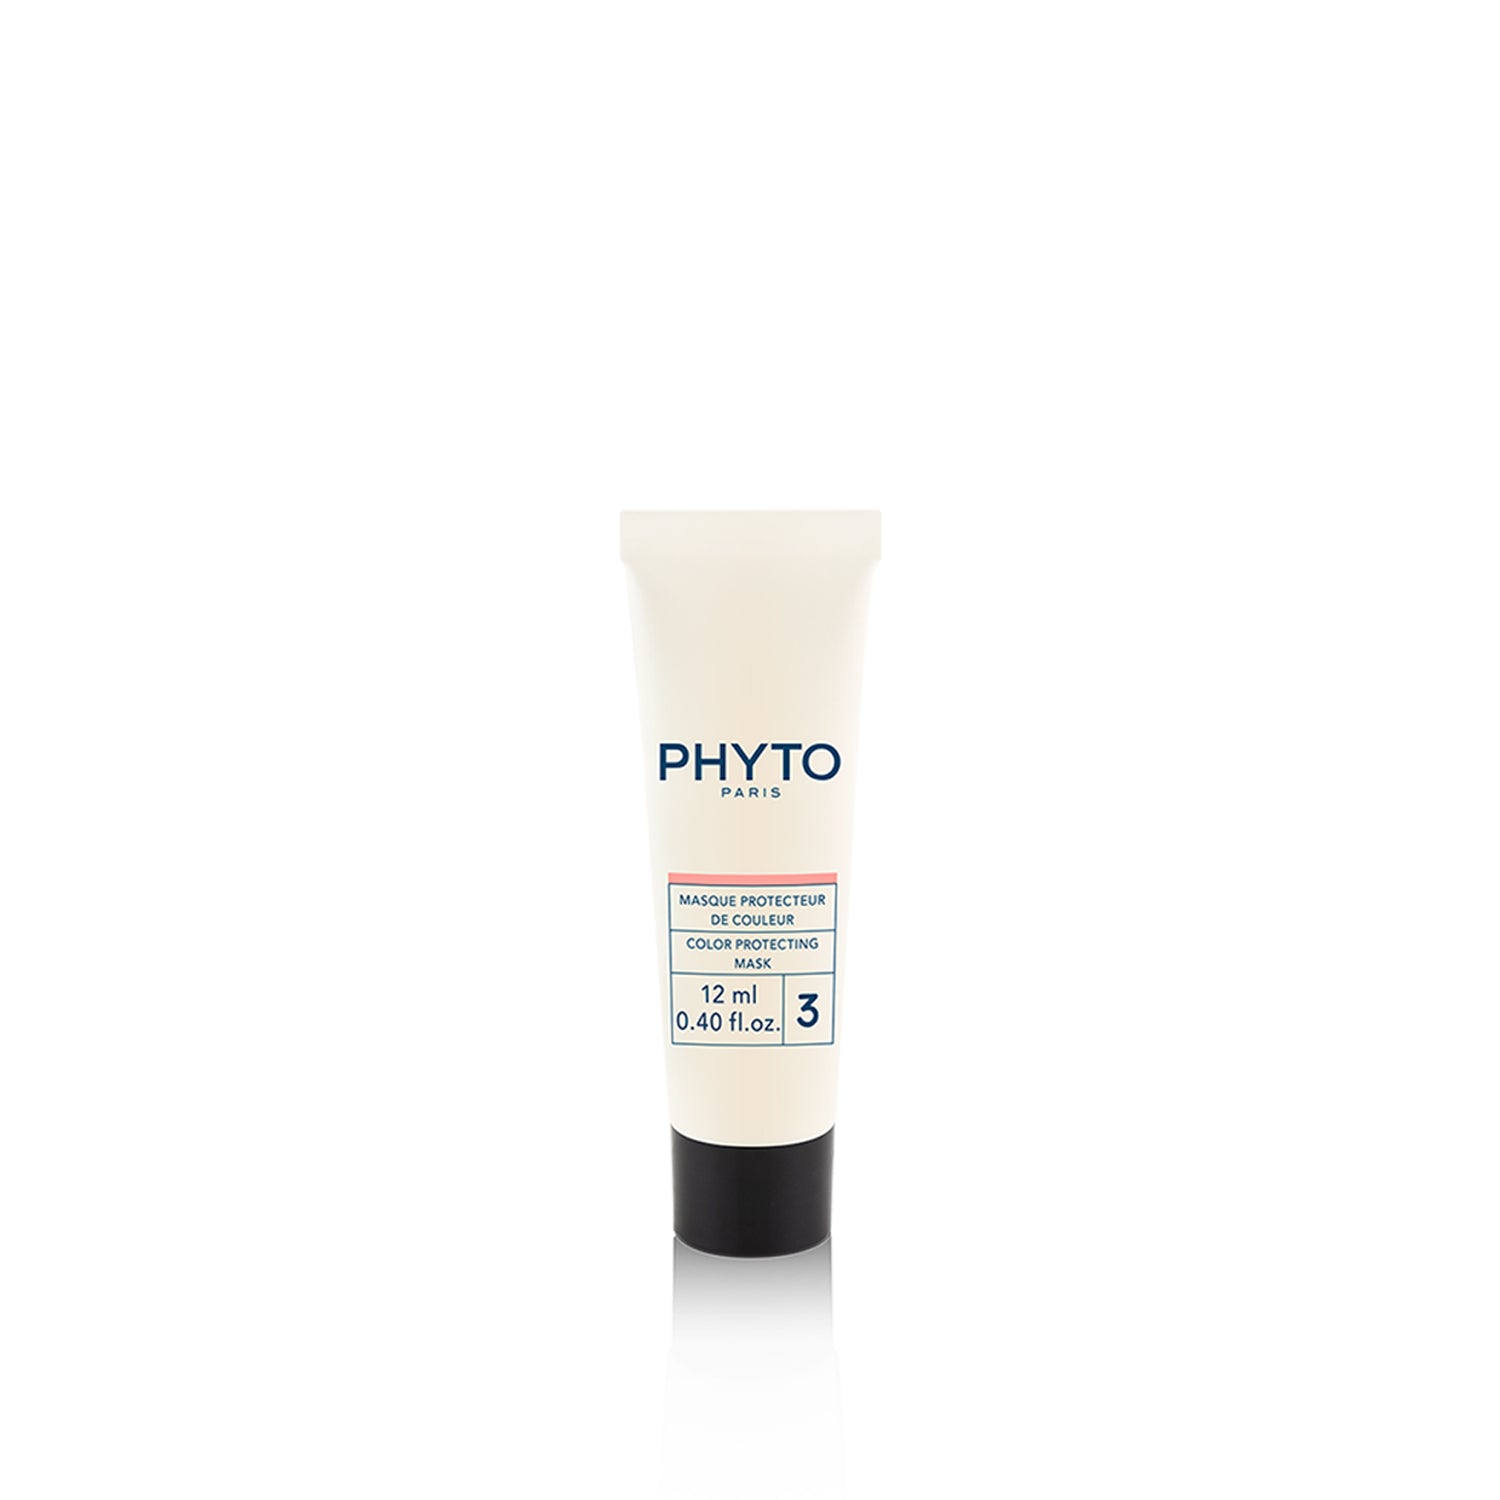 Phytocolor Permanent Color Shade 7 Blonde